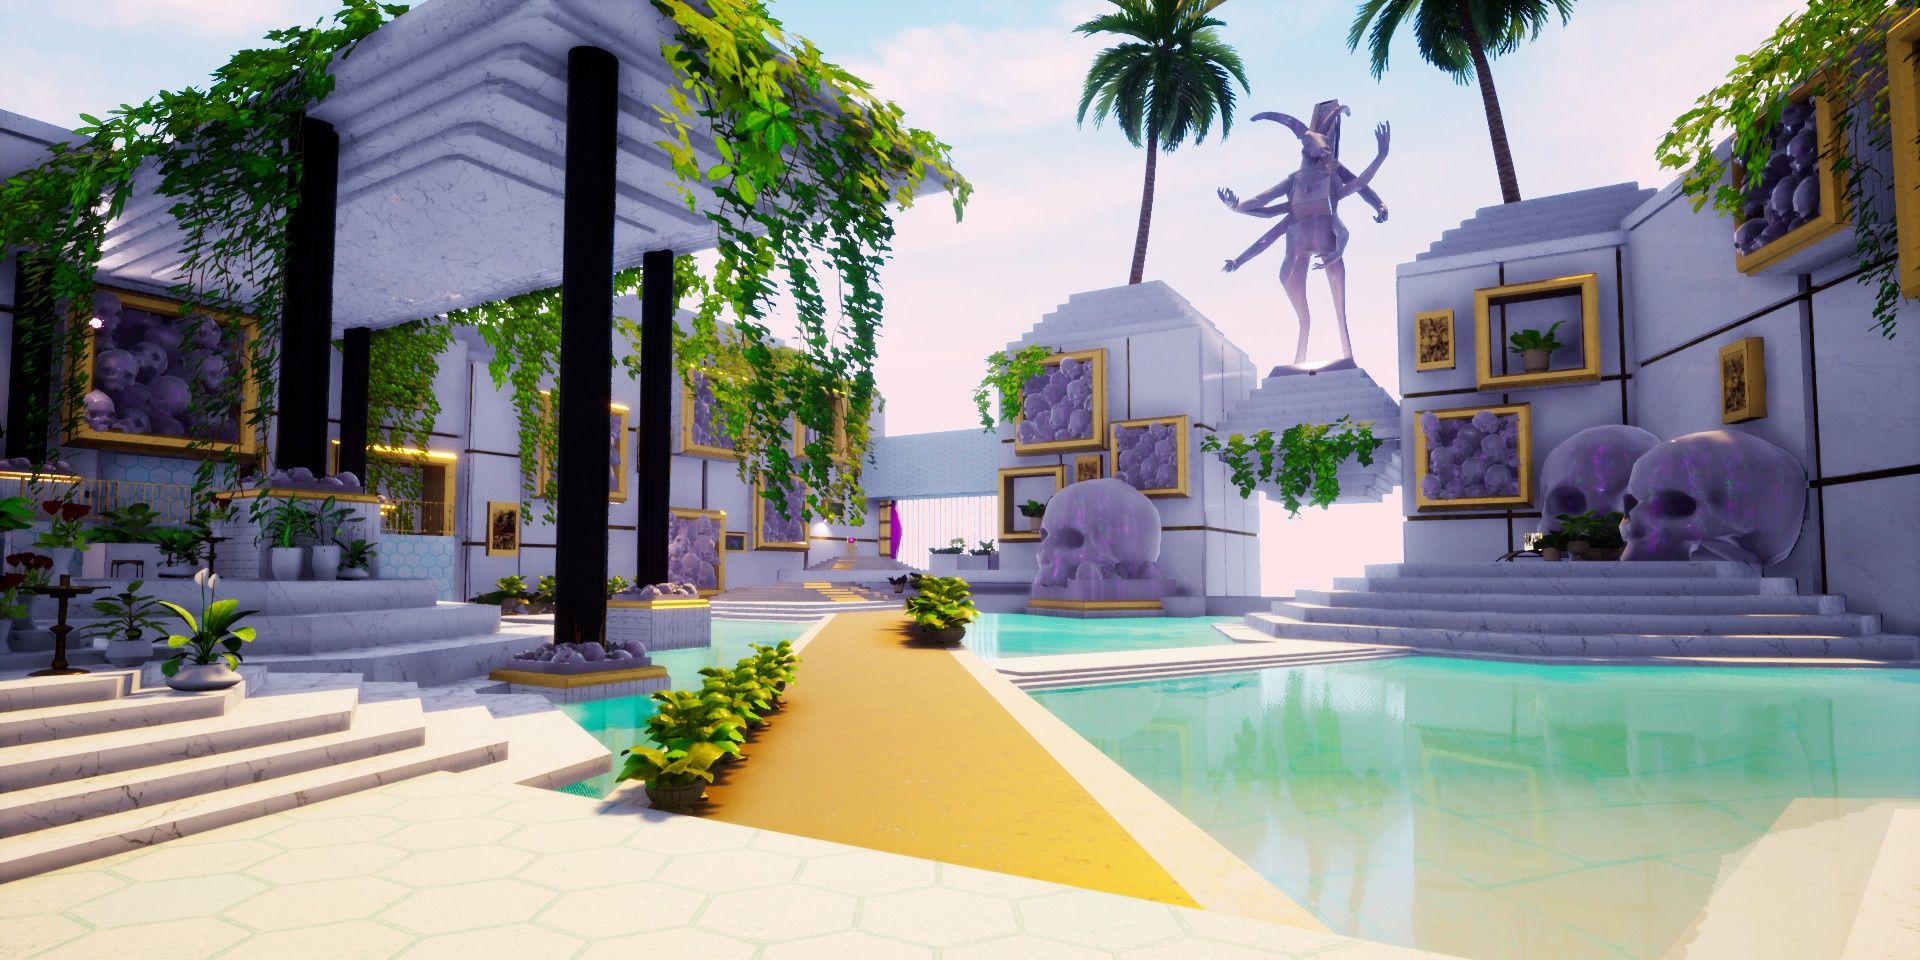 A tropical resort with platforms that lead to skull statues and paintings in Paradise Killer